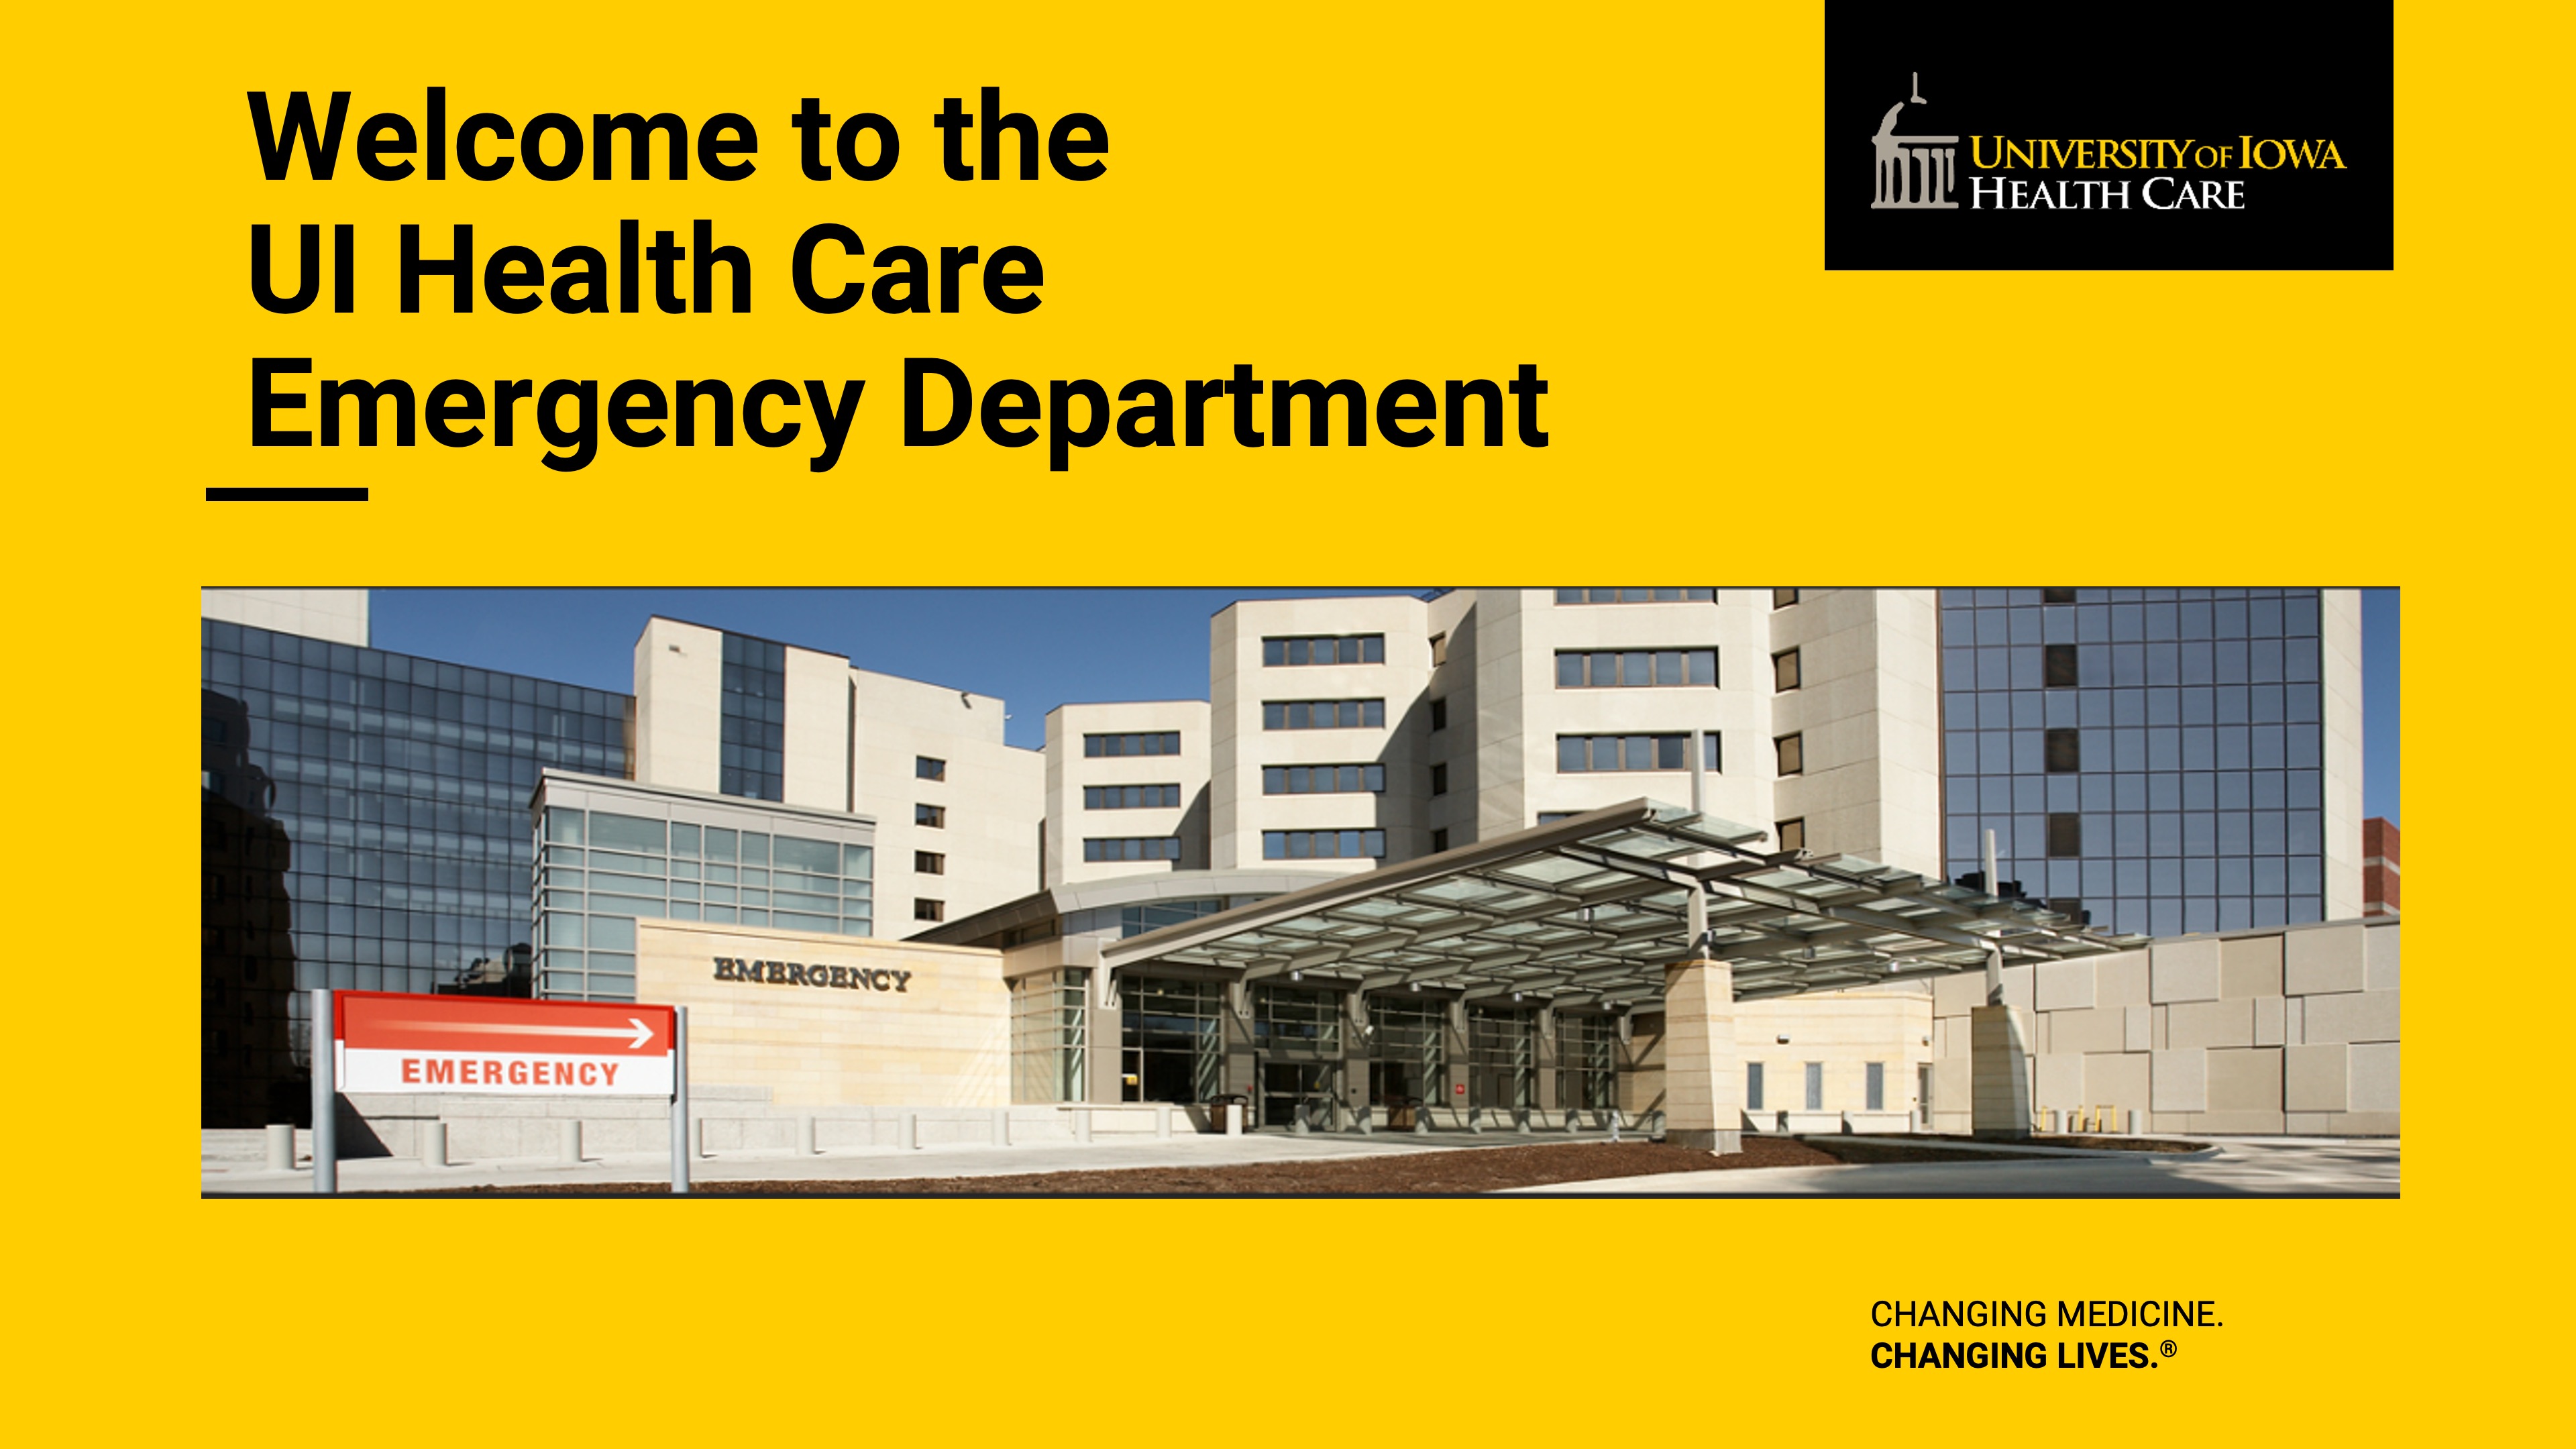 Welcome to the UI Health Care Emergency Department